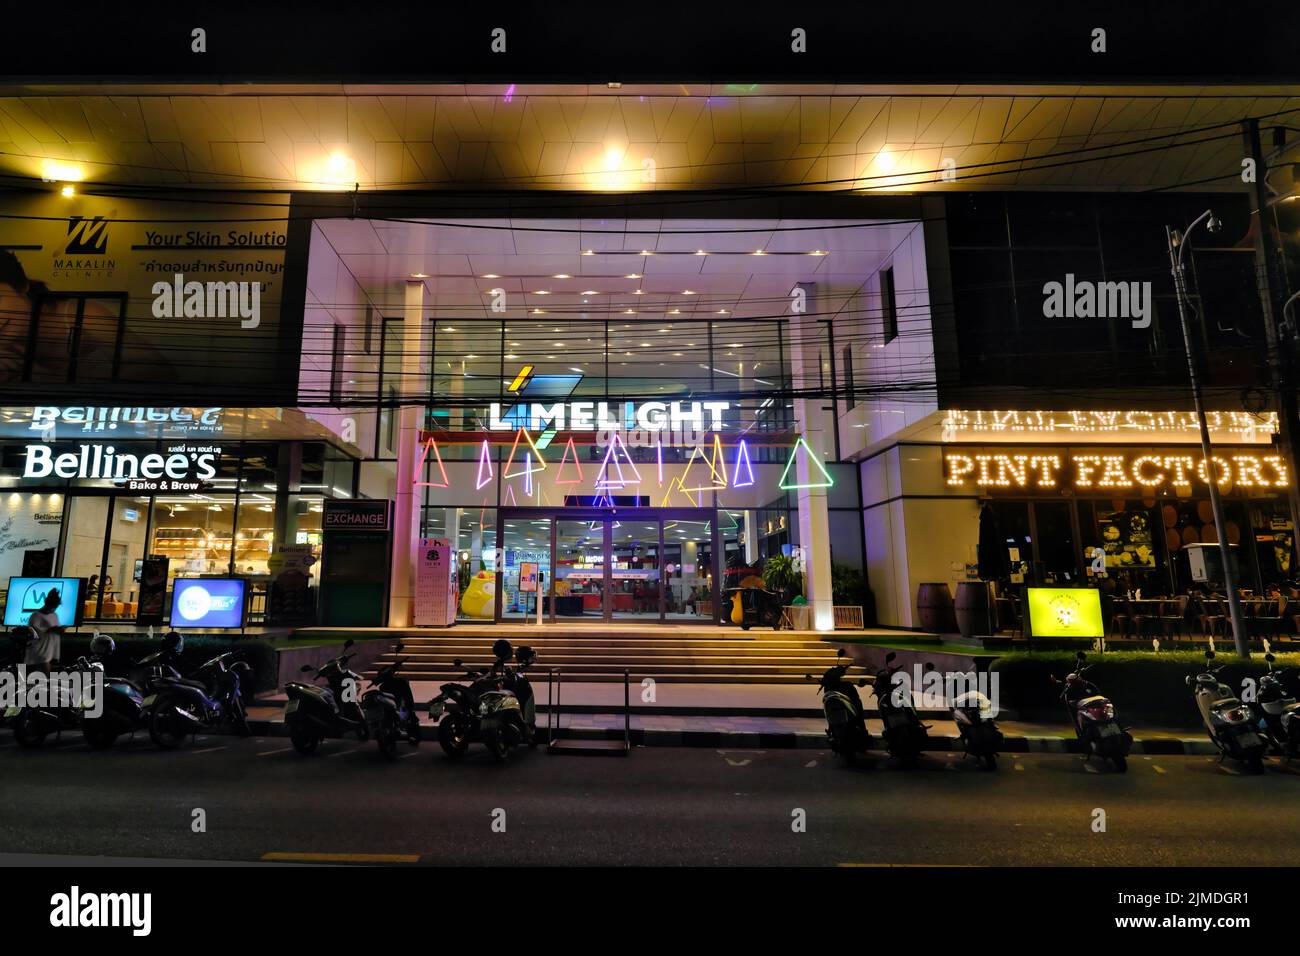 Limelight Avenue shopping mall in the Old Town area of Phuket Town (Phuket City), Thailand, illuminated in late evening. Stock Photo